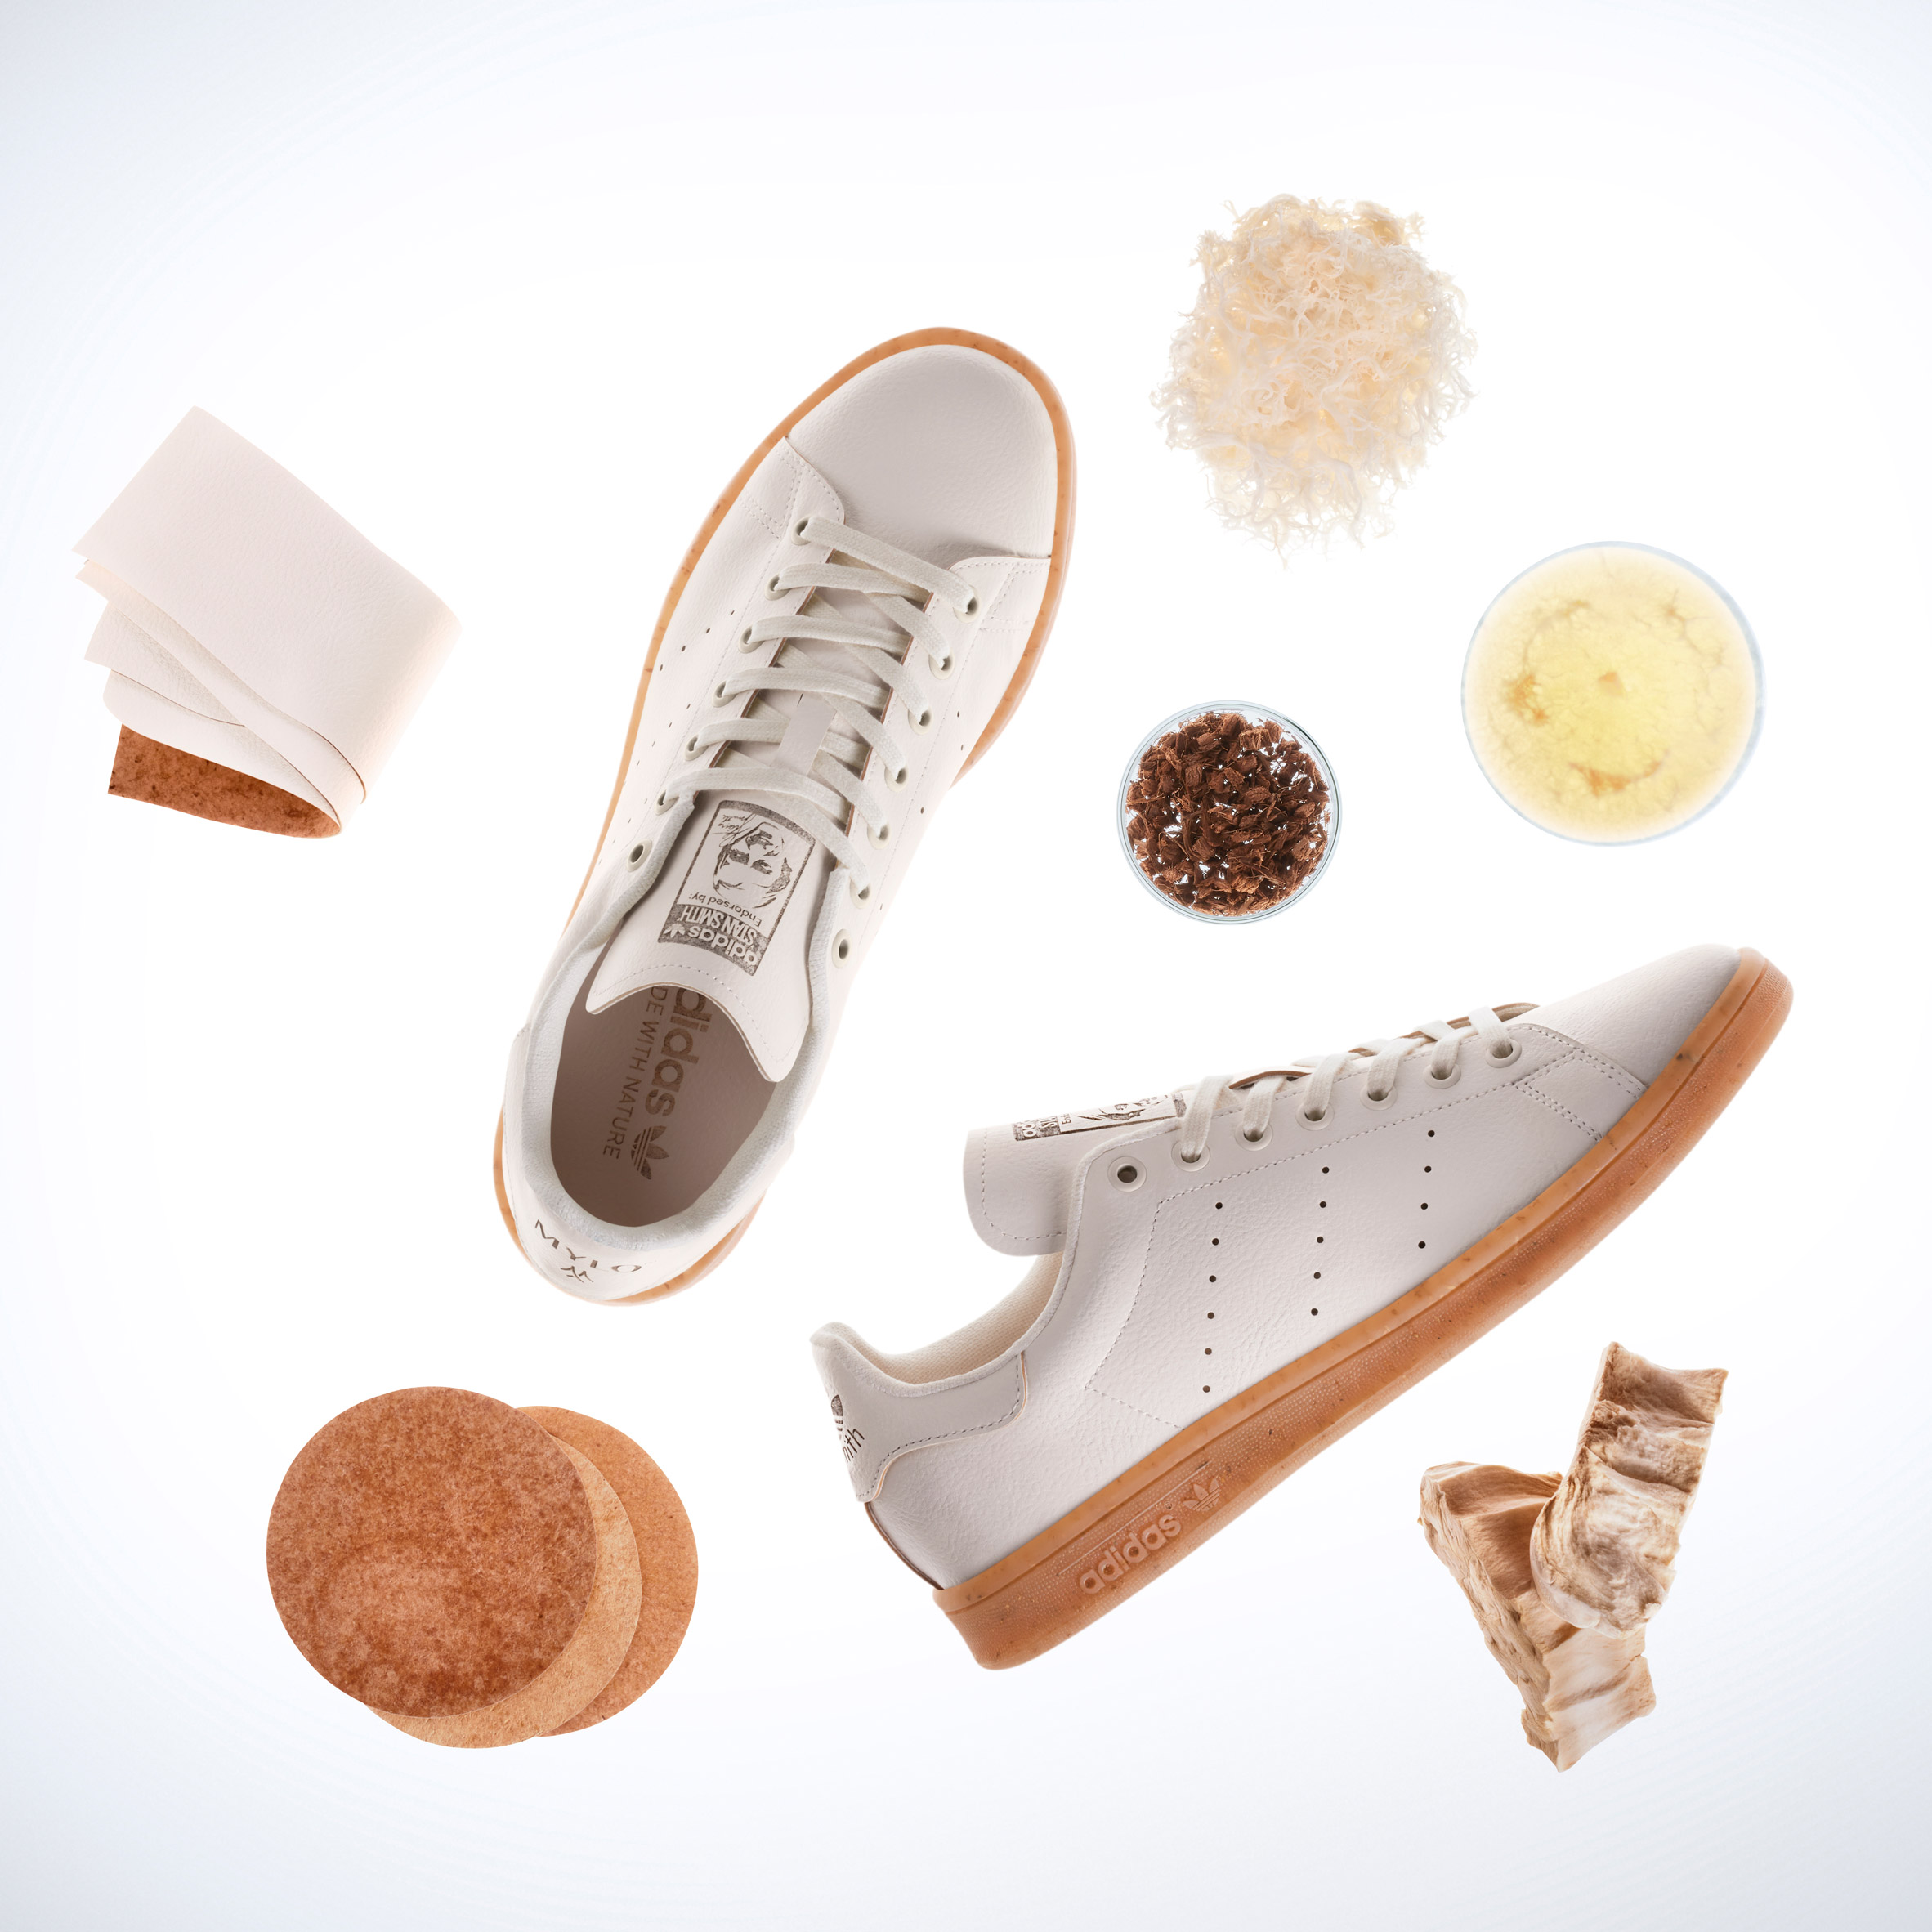 Adidas Stan Smiths made from Mylo mycelium leather around ingredients